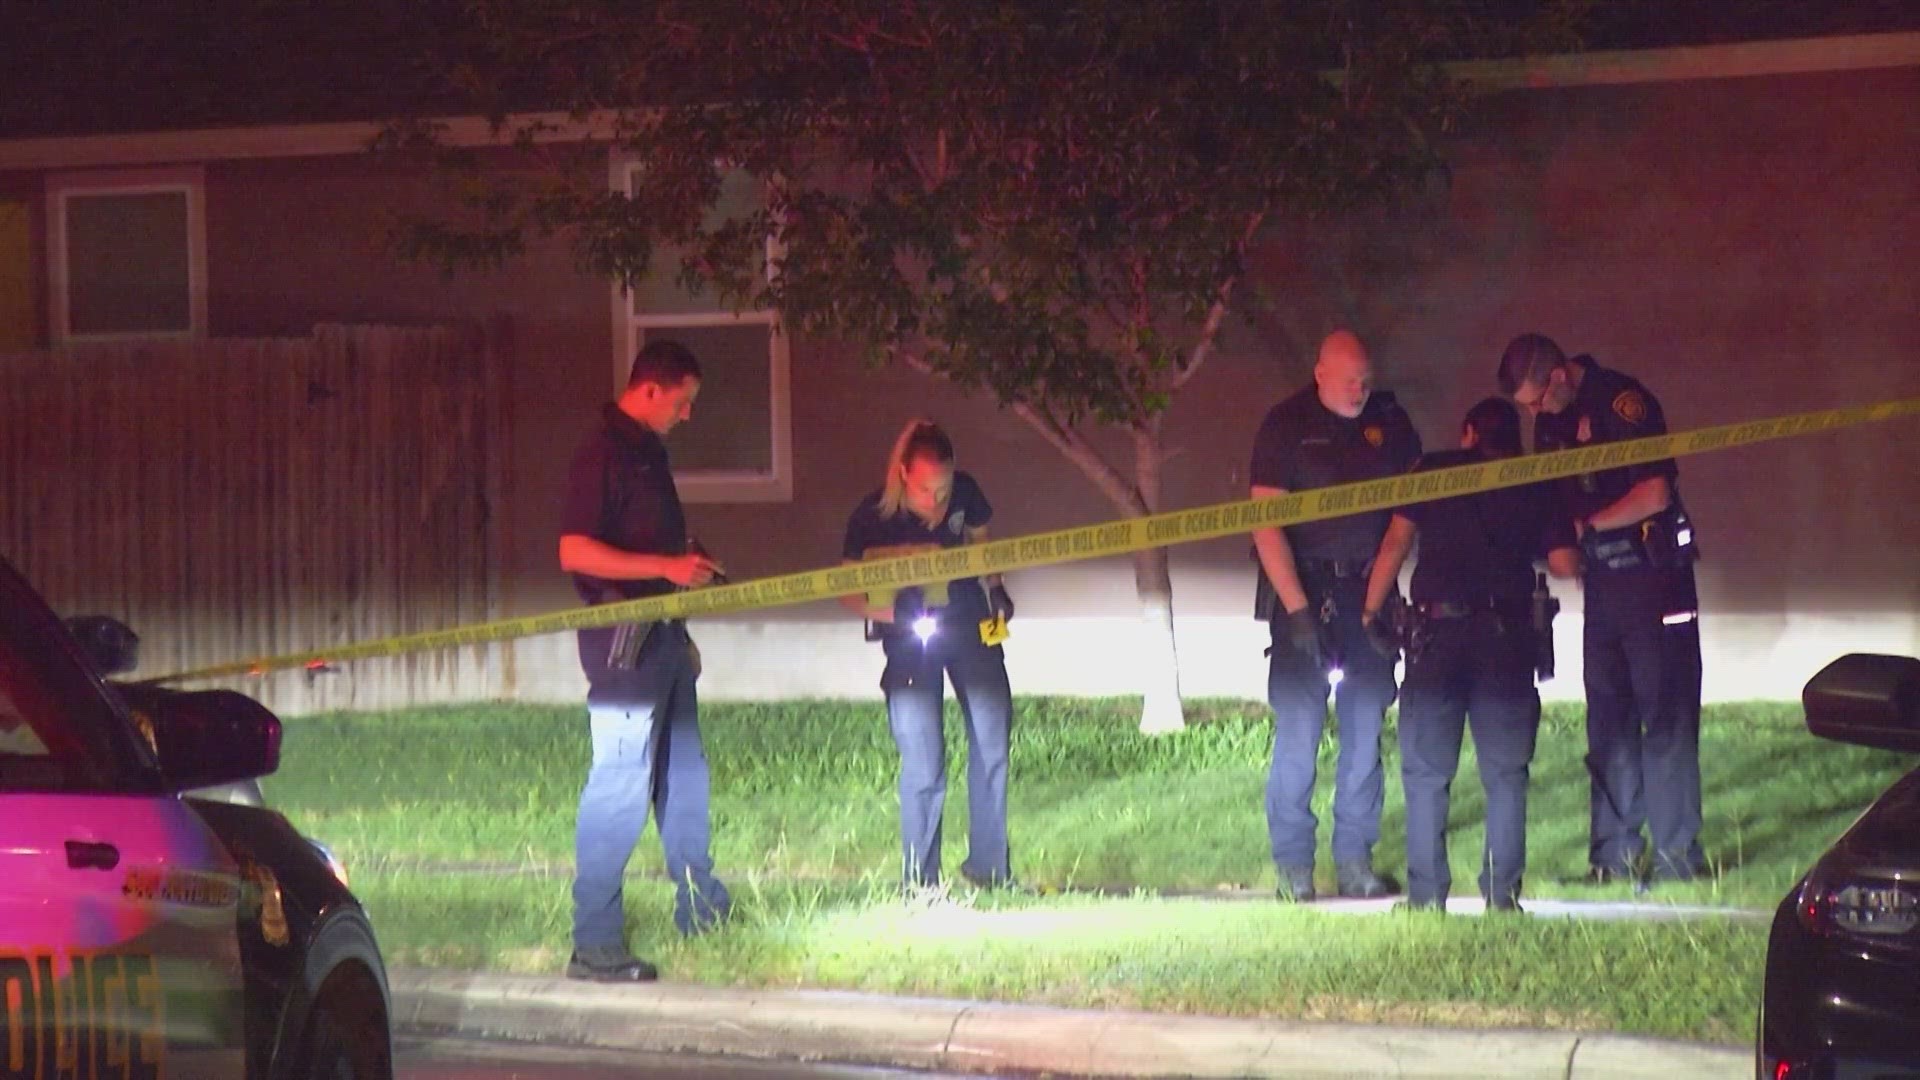 Woman found dead in her garage, man in critical condition after being shot